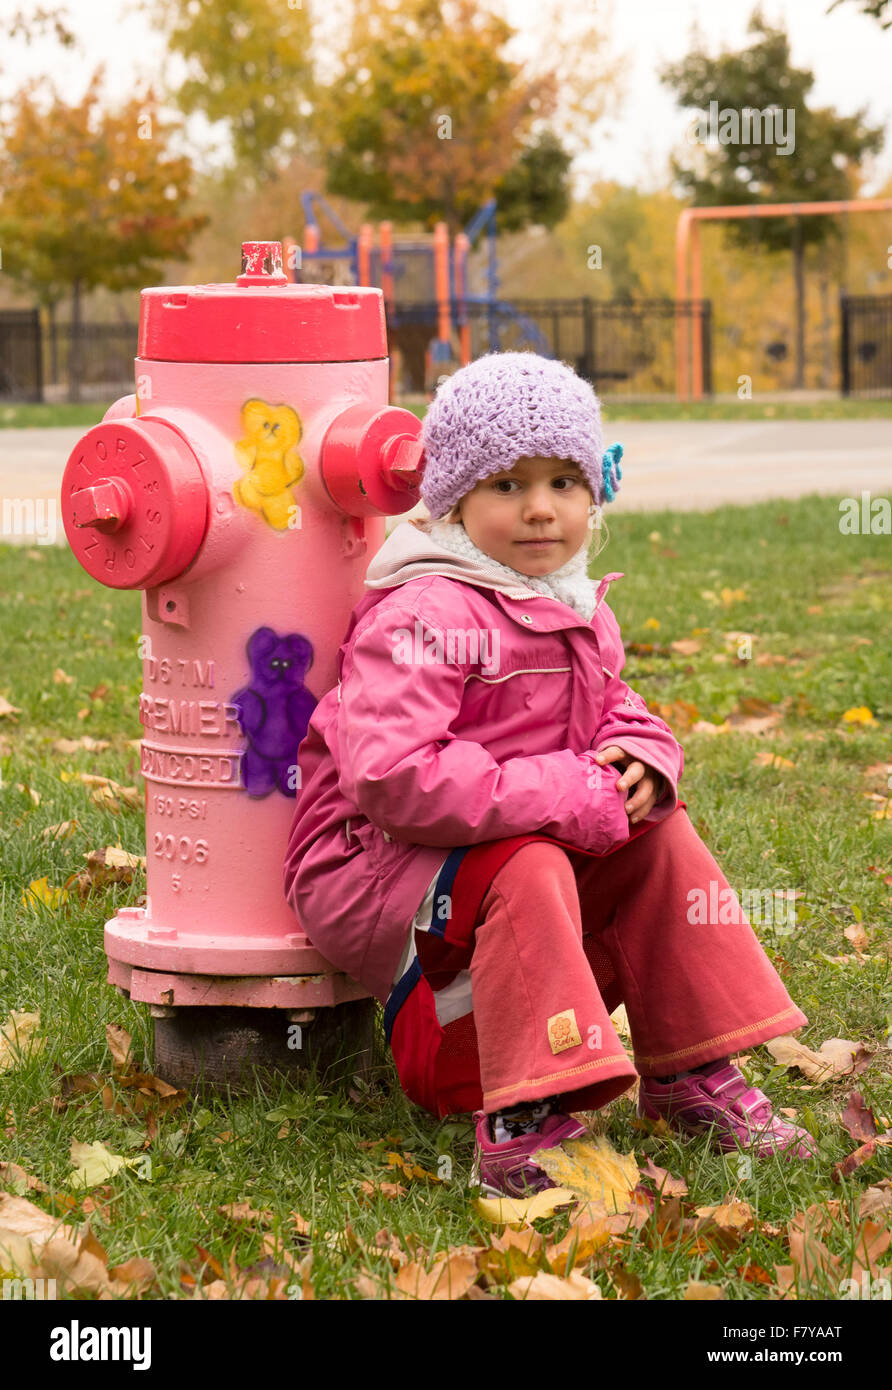 Child on a pink fire hydrant Stock Photo